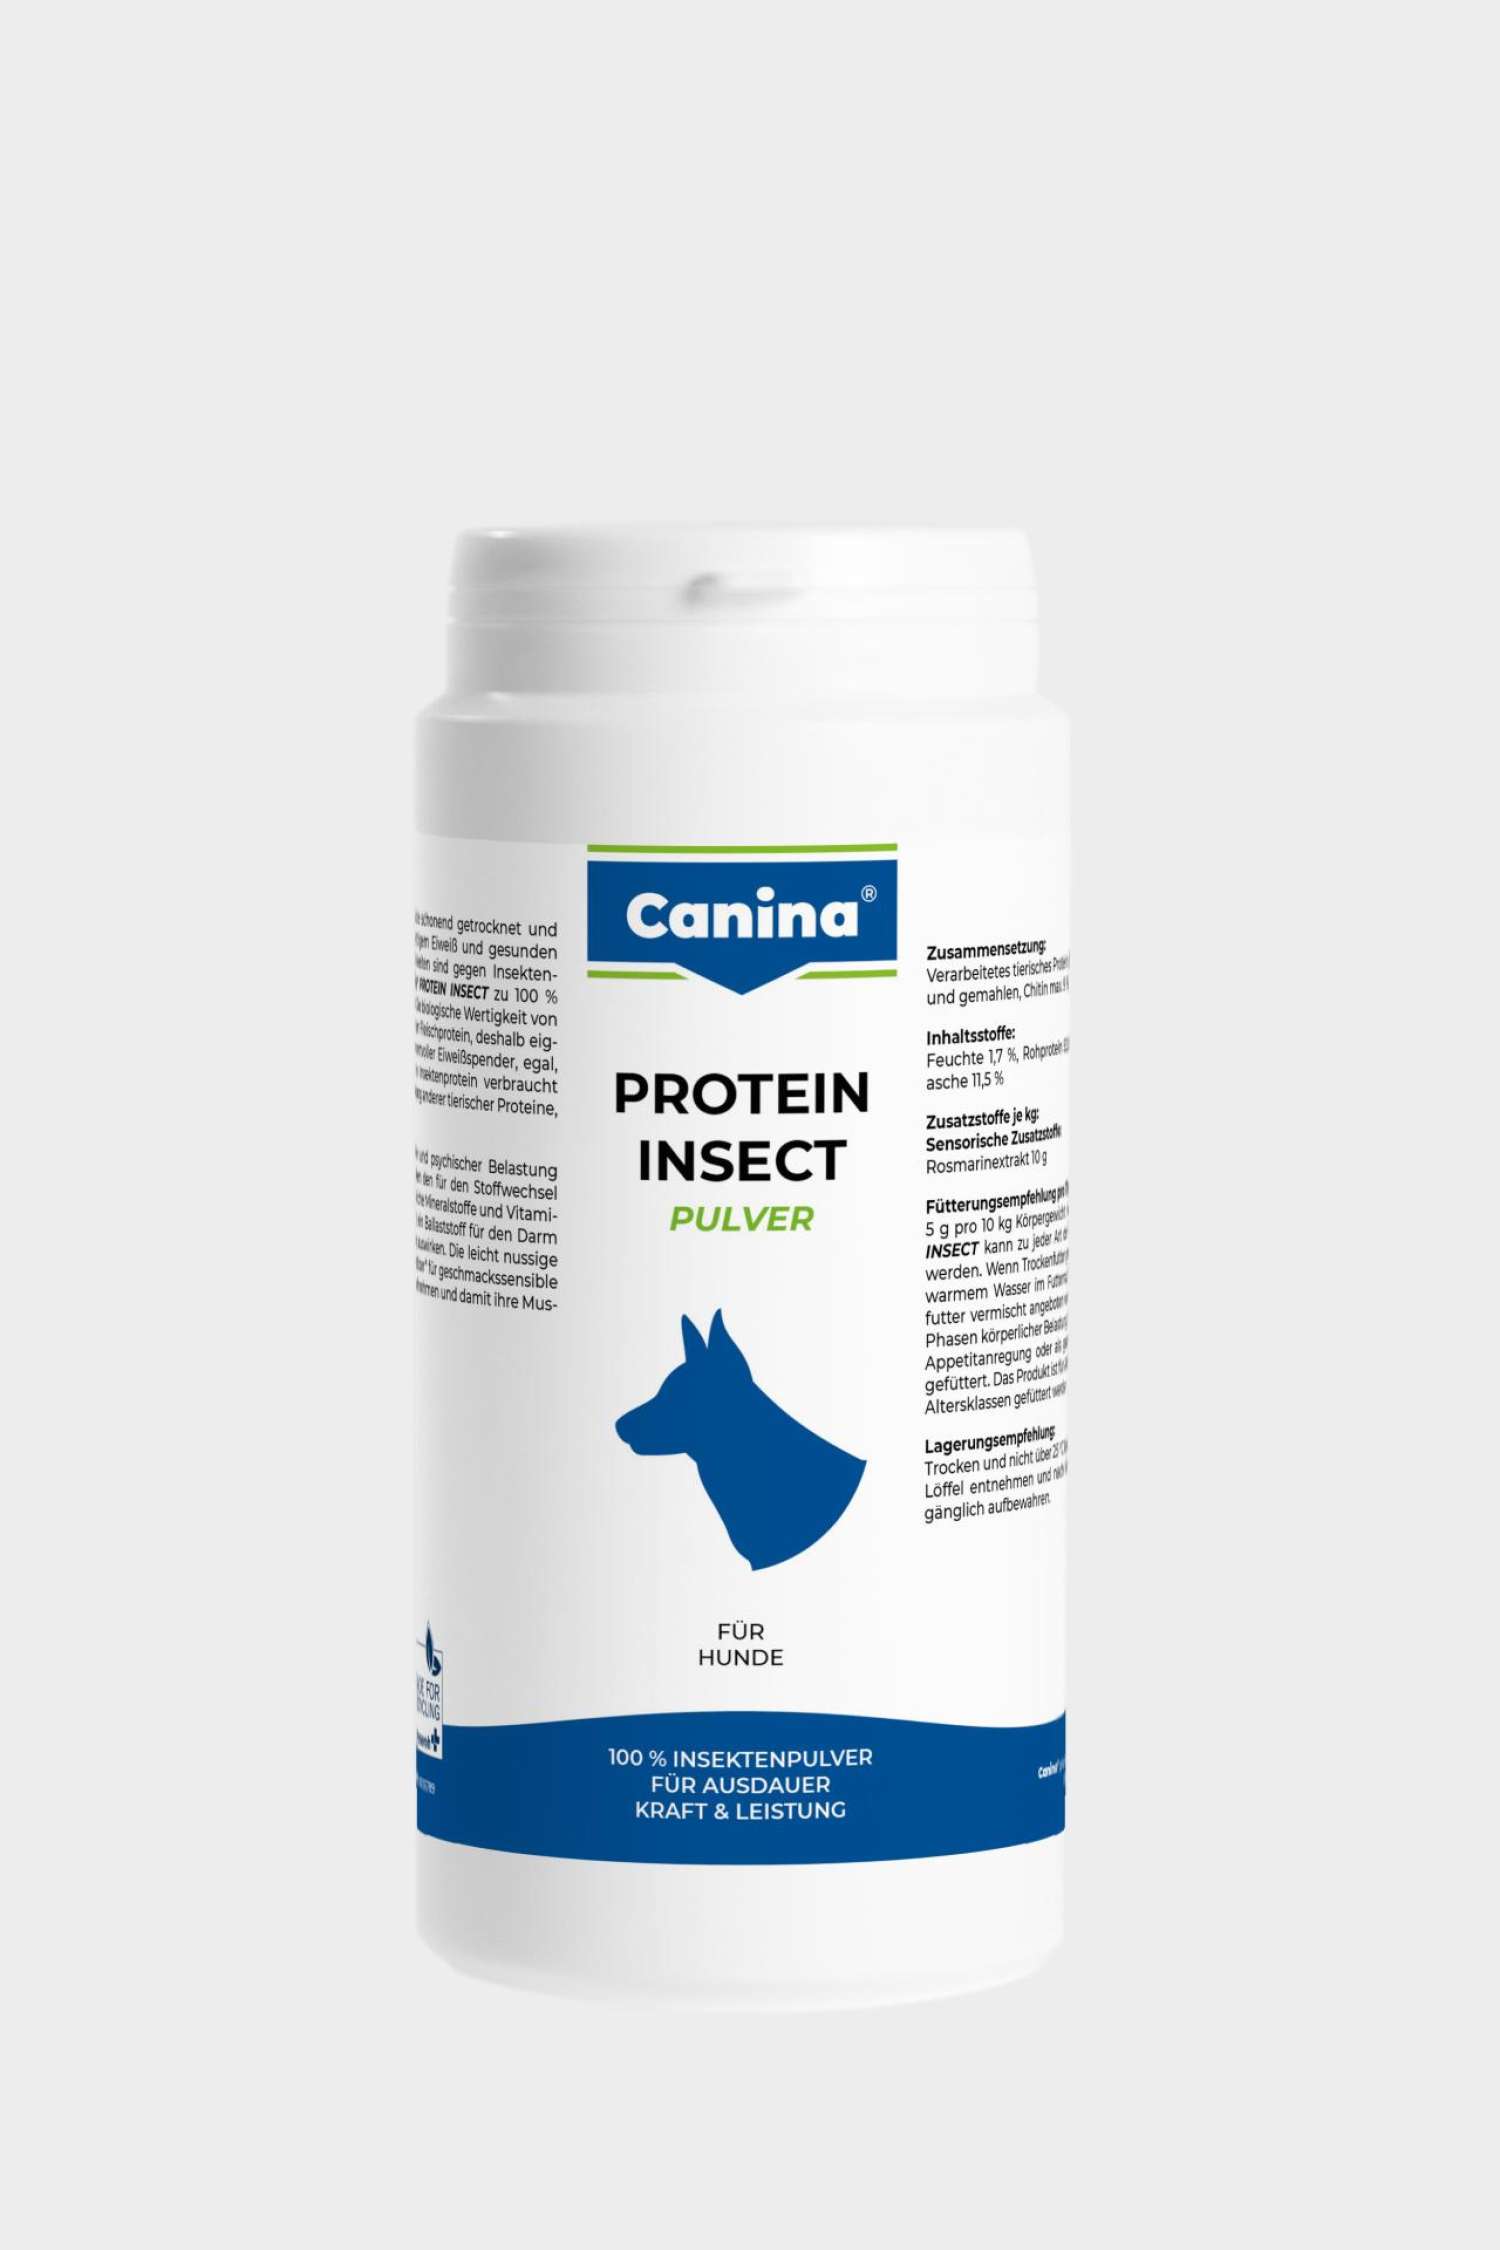 Canina Insect Protein